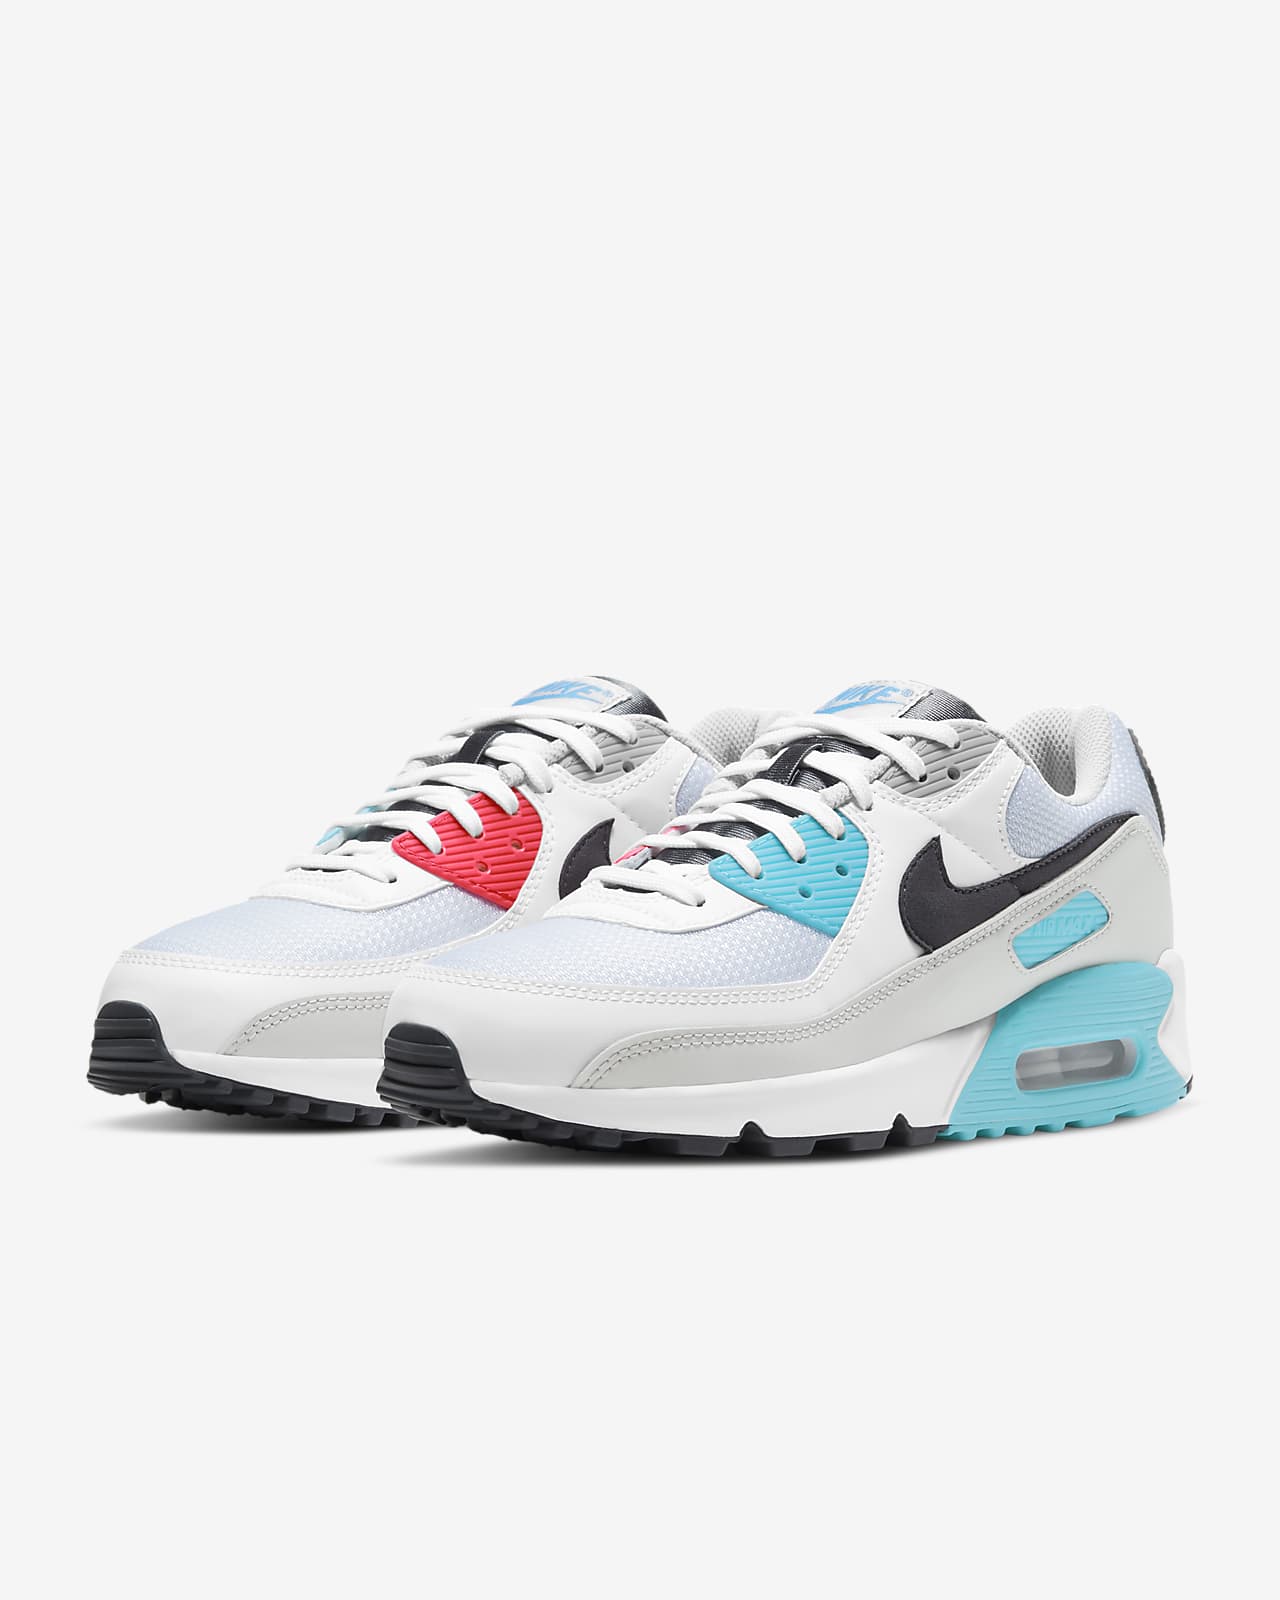 nike air max 90 mens red and white